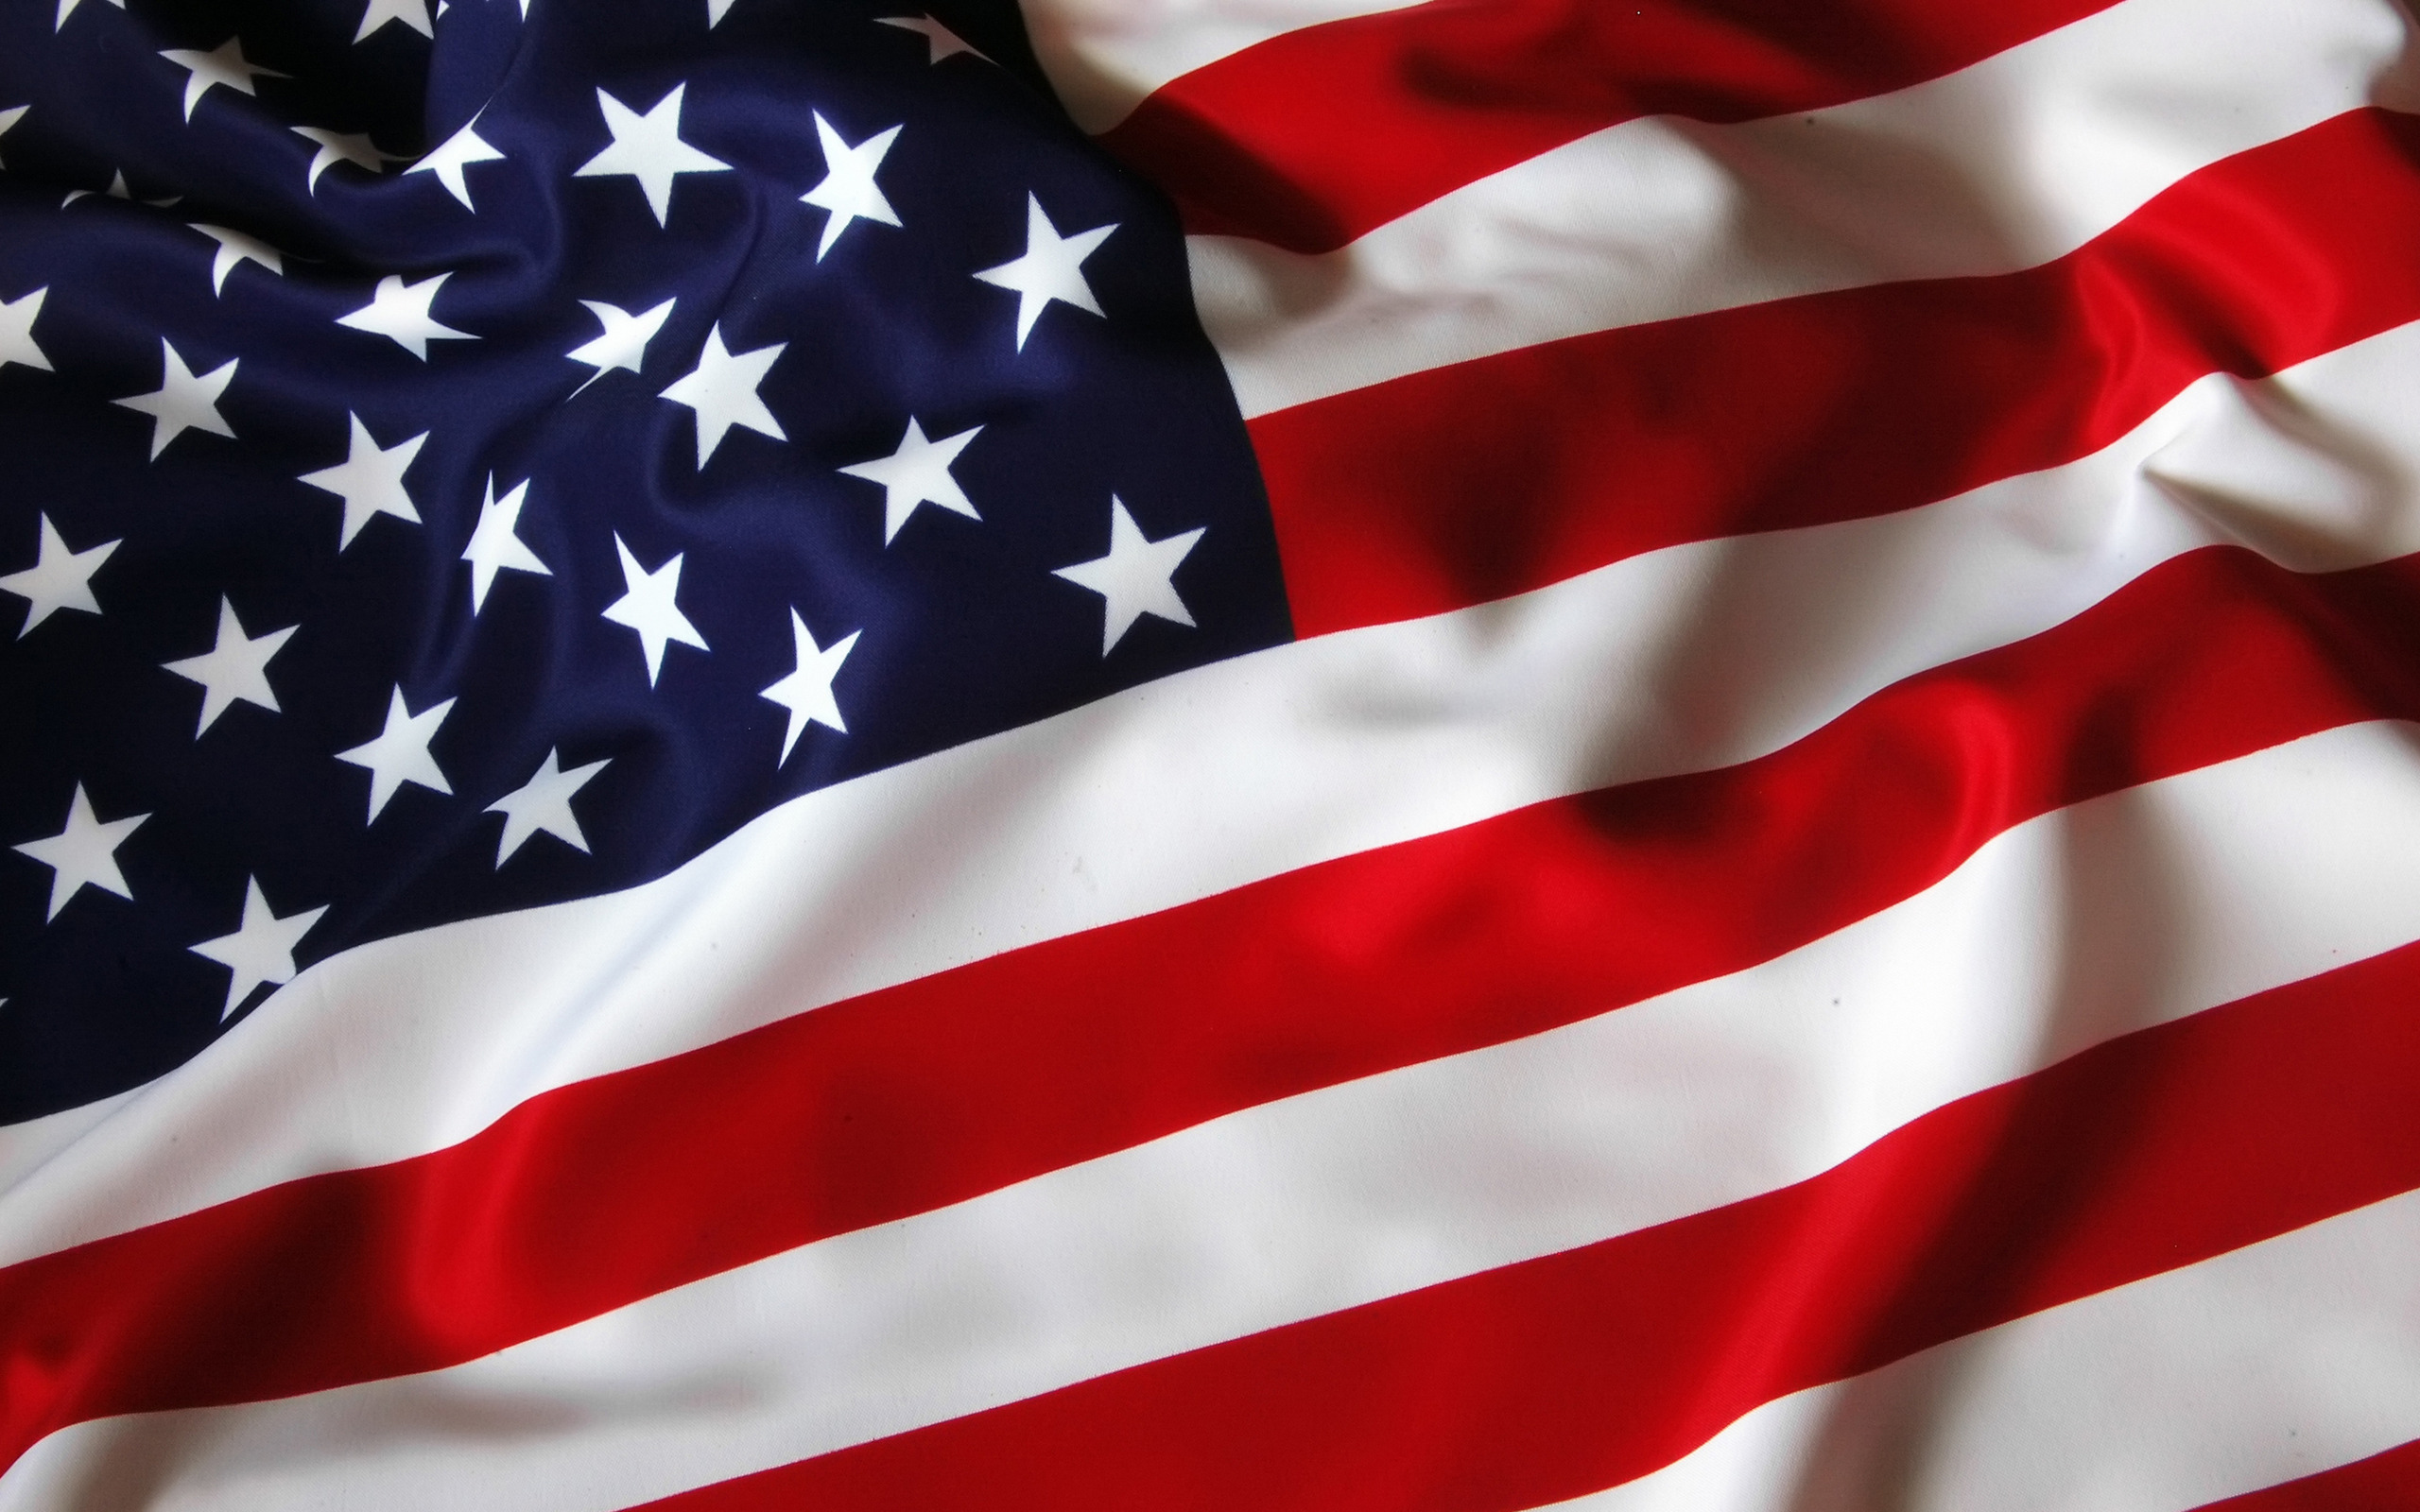 Image Credit: http://www.hdwallpapersnew.net/wp-content/uploads/2015/01/american-flag-beautiful-images-hd-new-wallpapers-of-us-flag.jpg